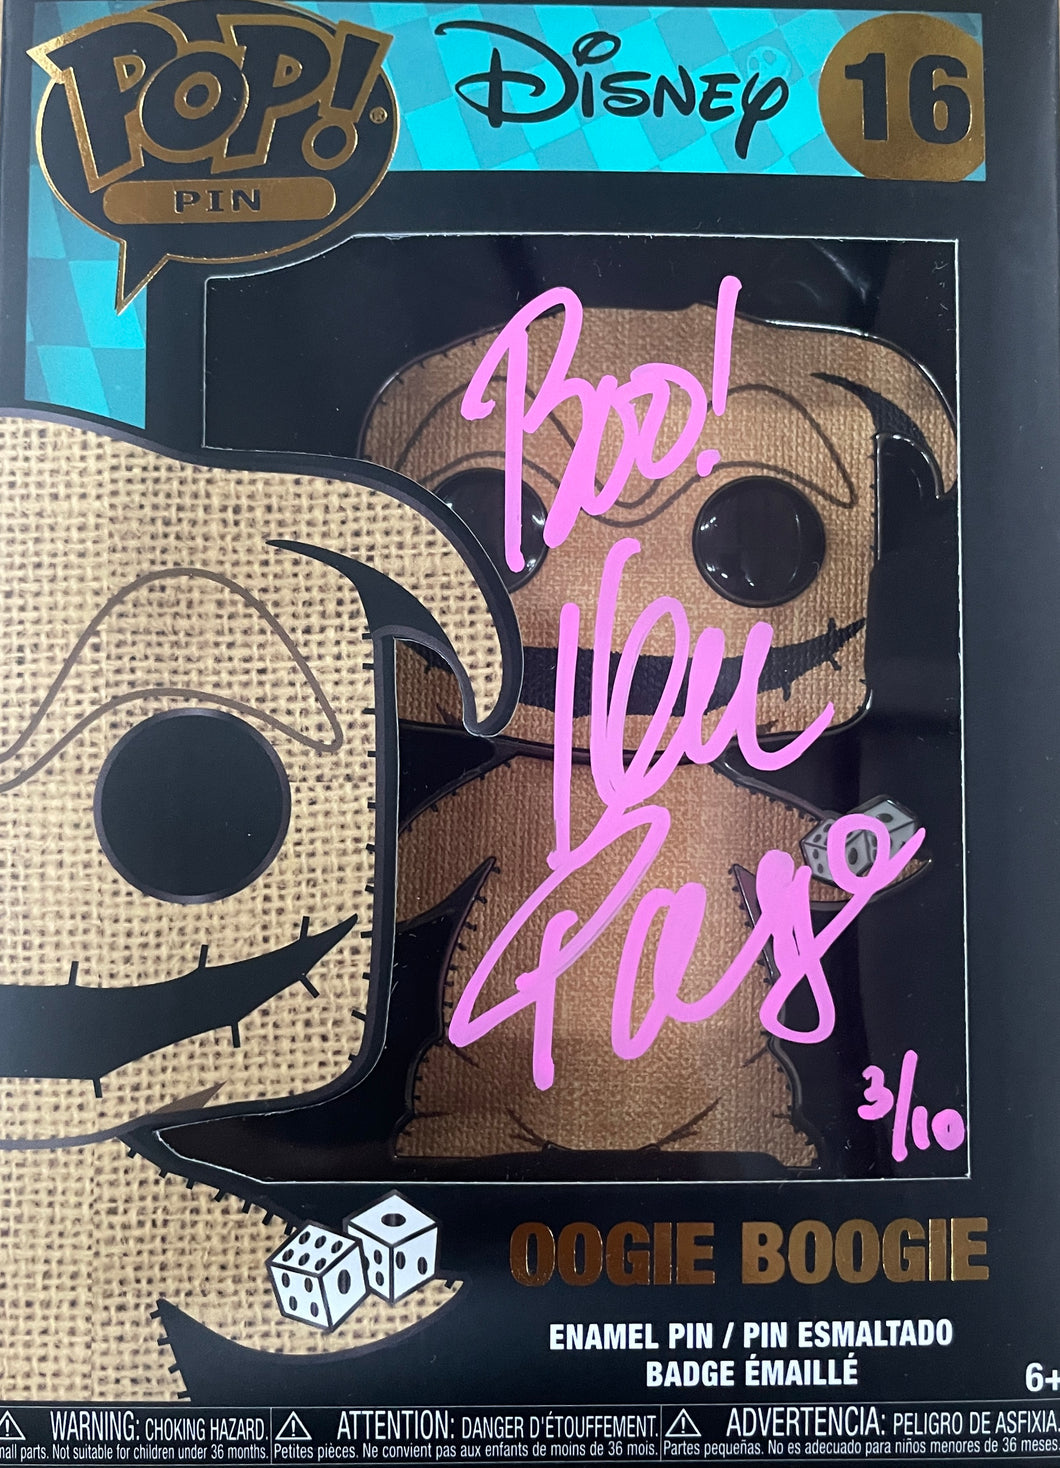 Ken Page signed Oogie Boogie Funko Pop! Pin Disney NBC #16 OCCM Autographed COA